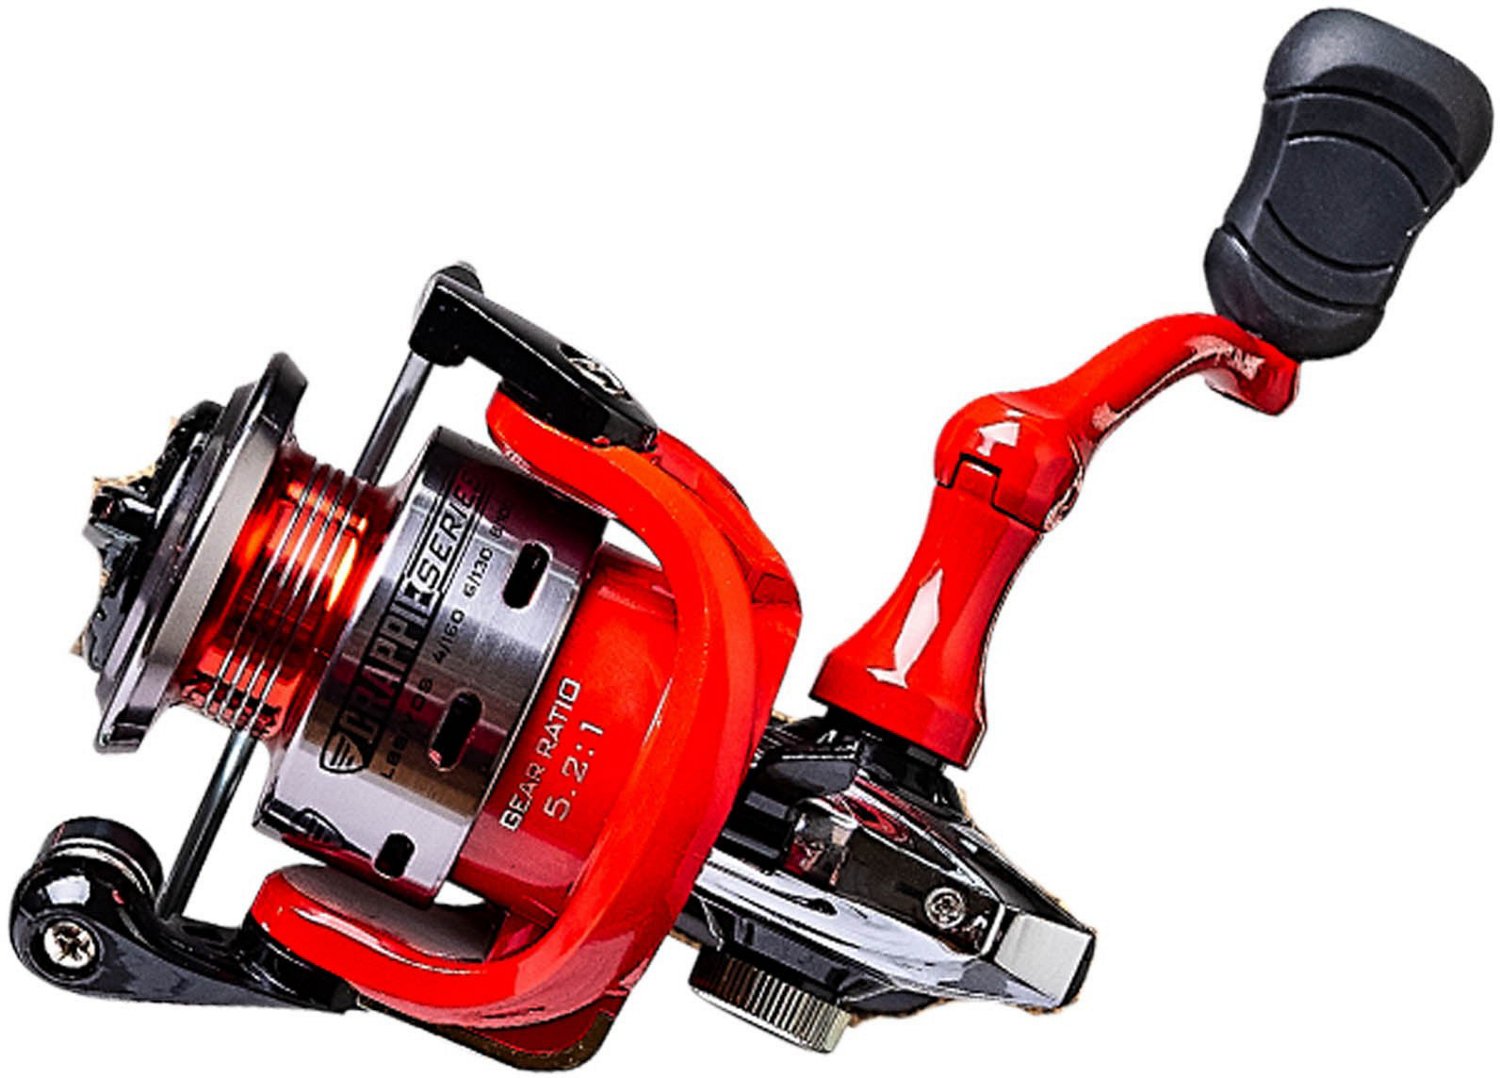 Academy Sports + Outdoors Favorite Fishing Crappie Series Spinning Reel